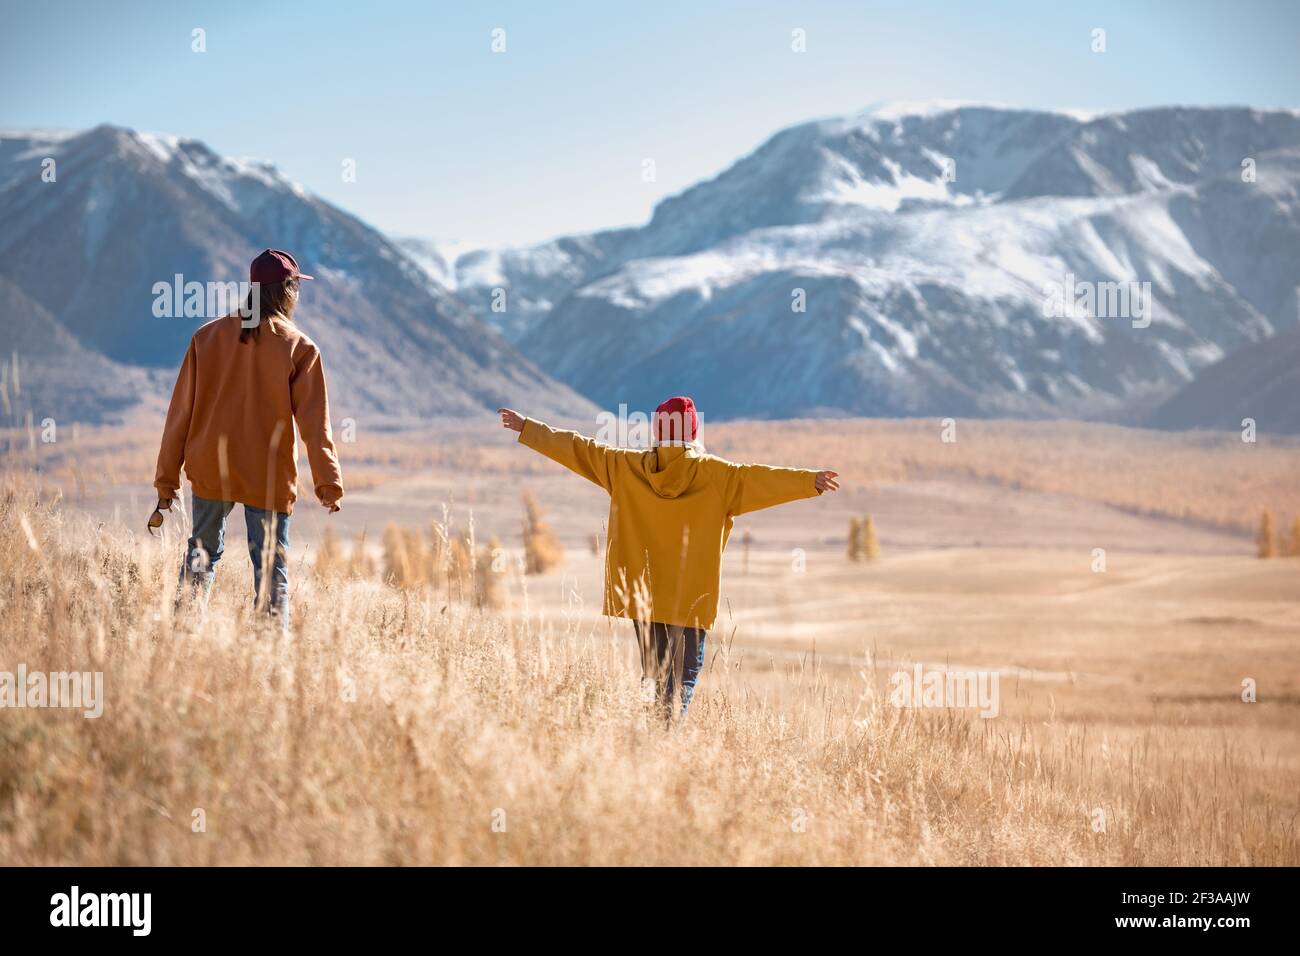 Two girls hikers are walking in mountains without backpacks Stock Photo